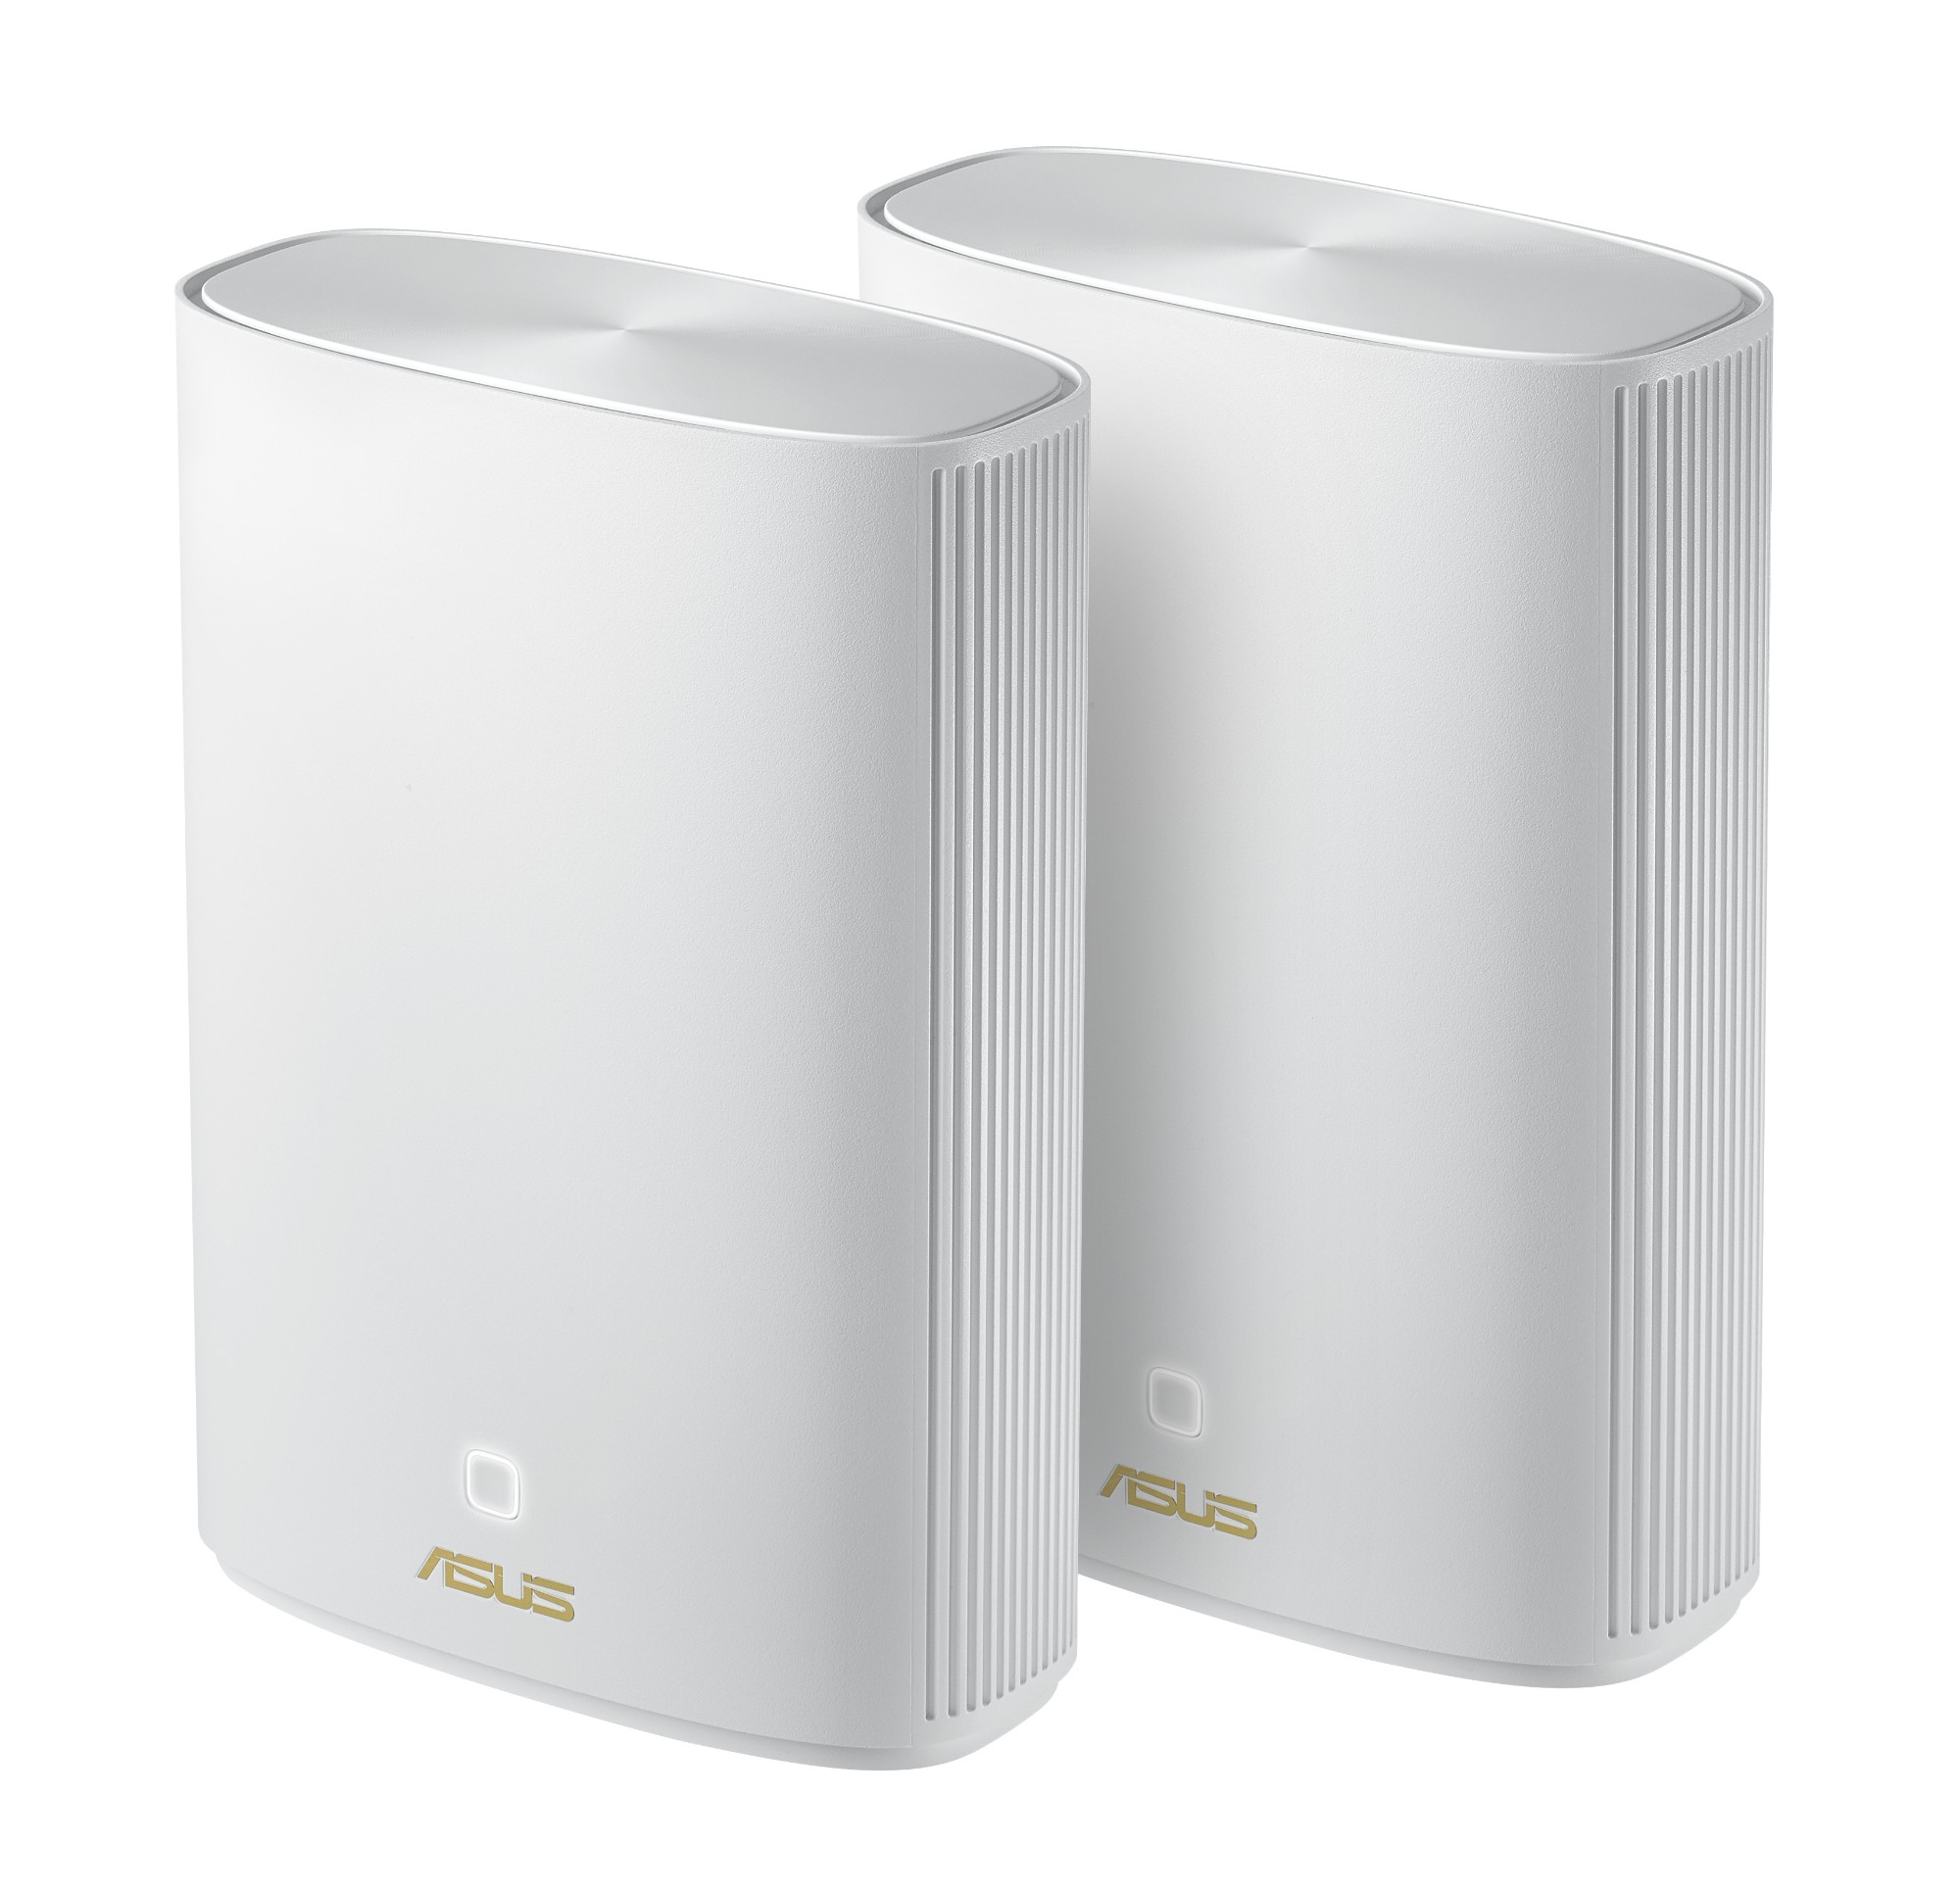 Asus - Asus ZenWiFi AX Hybrid (XP4) Pack of 2 - White